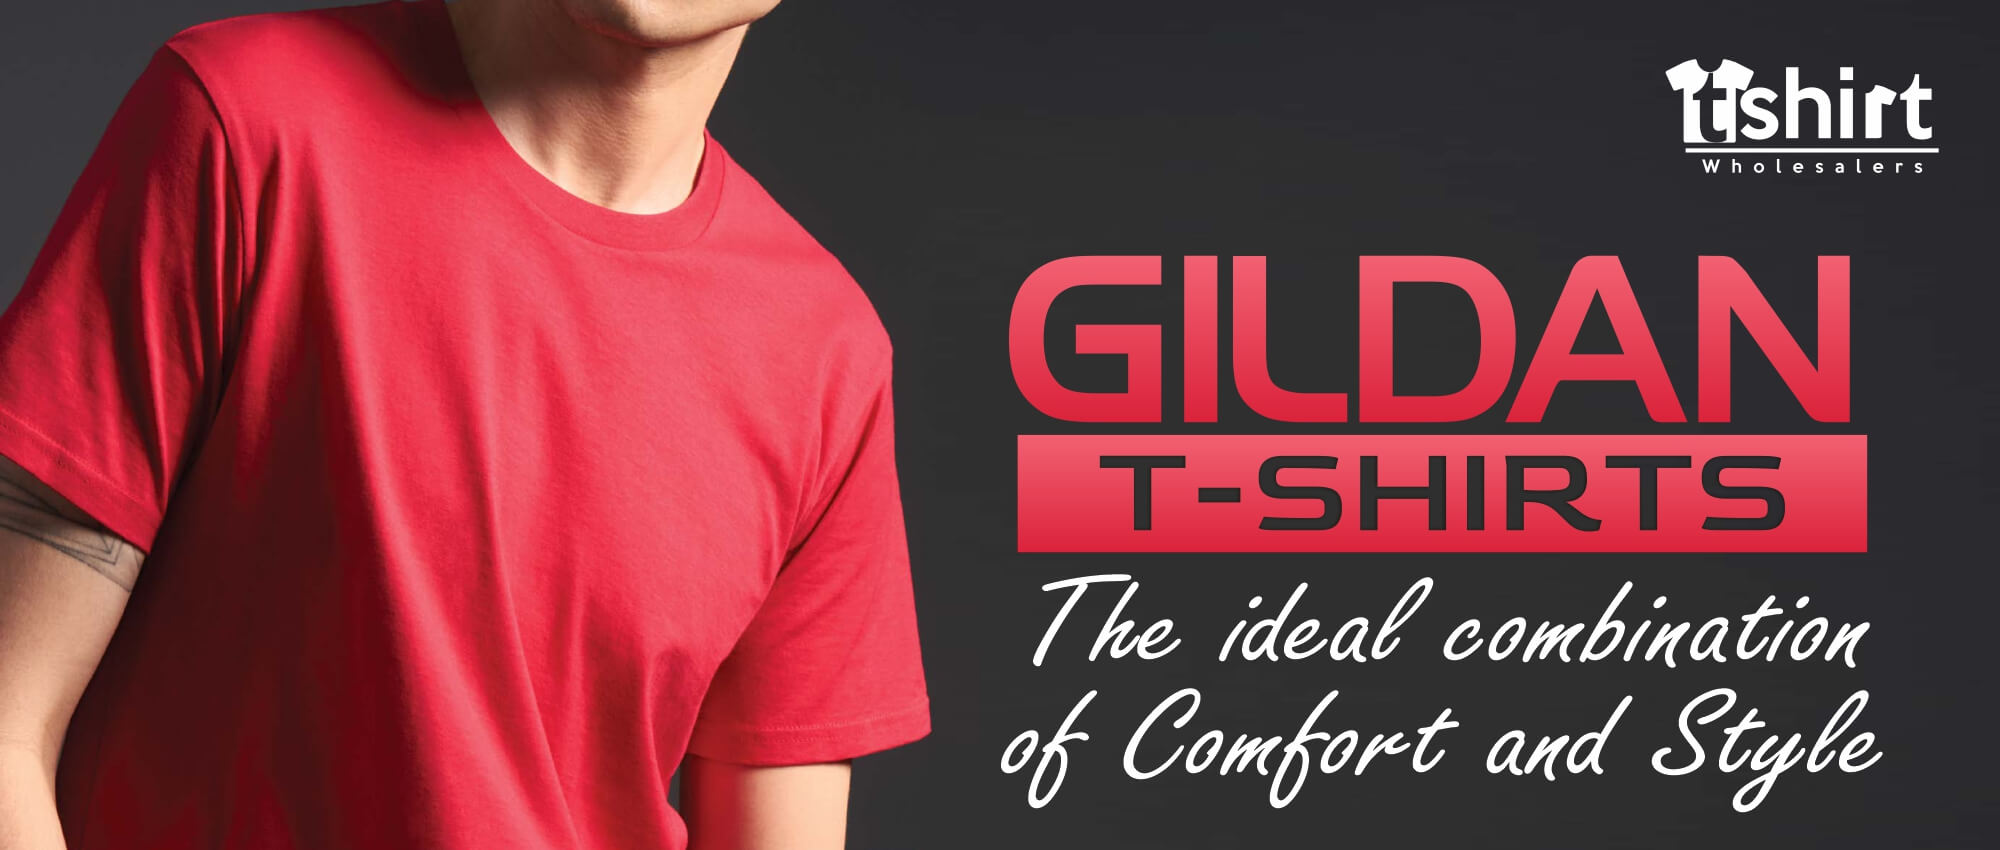 GILDAN T-SHIRTS THE IDEAL COMBINATION OF COMFORT AND STYLE